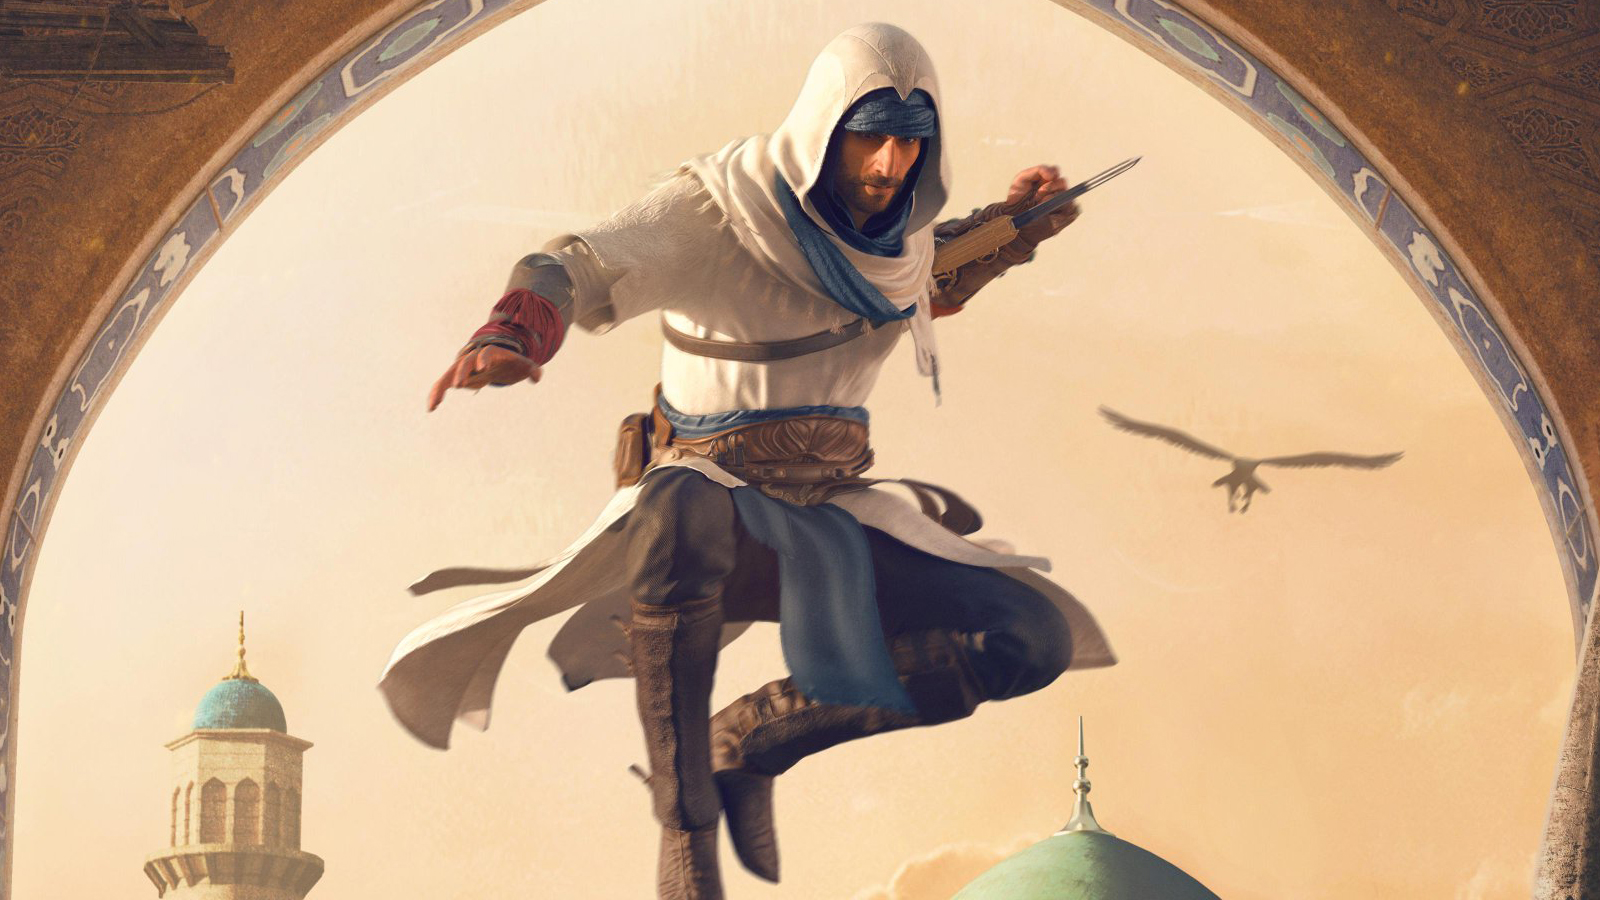 Assassin's Creed Mirage Player Count Is 'in Line' With Origins and